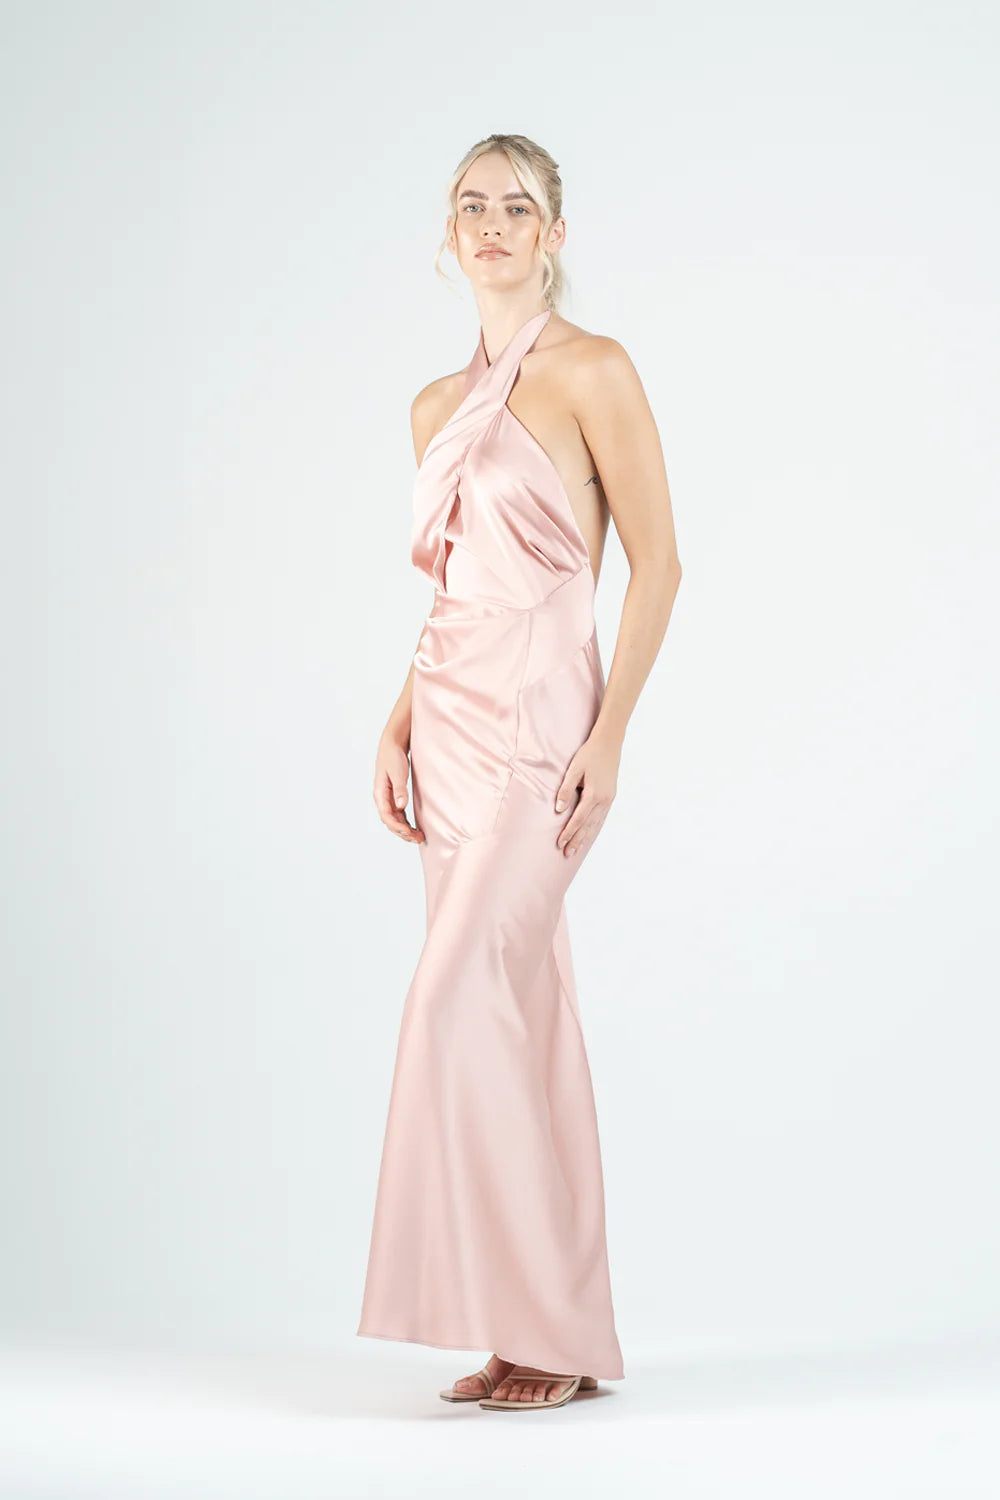 One Fell Swoop Zion Maxi, Dusty Rose